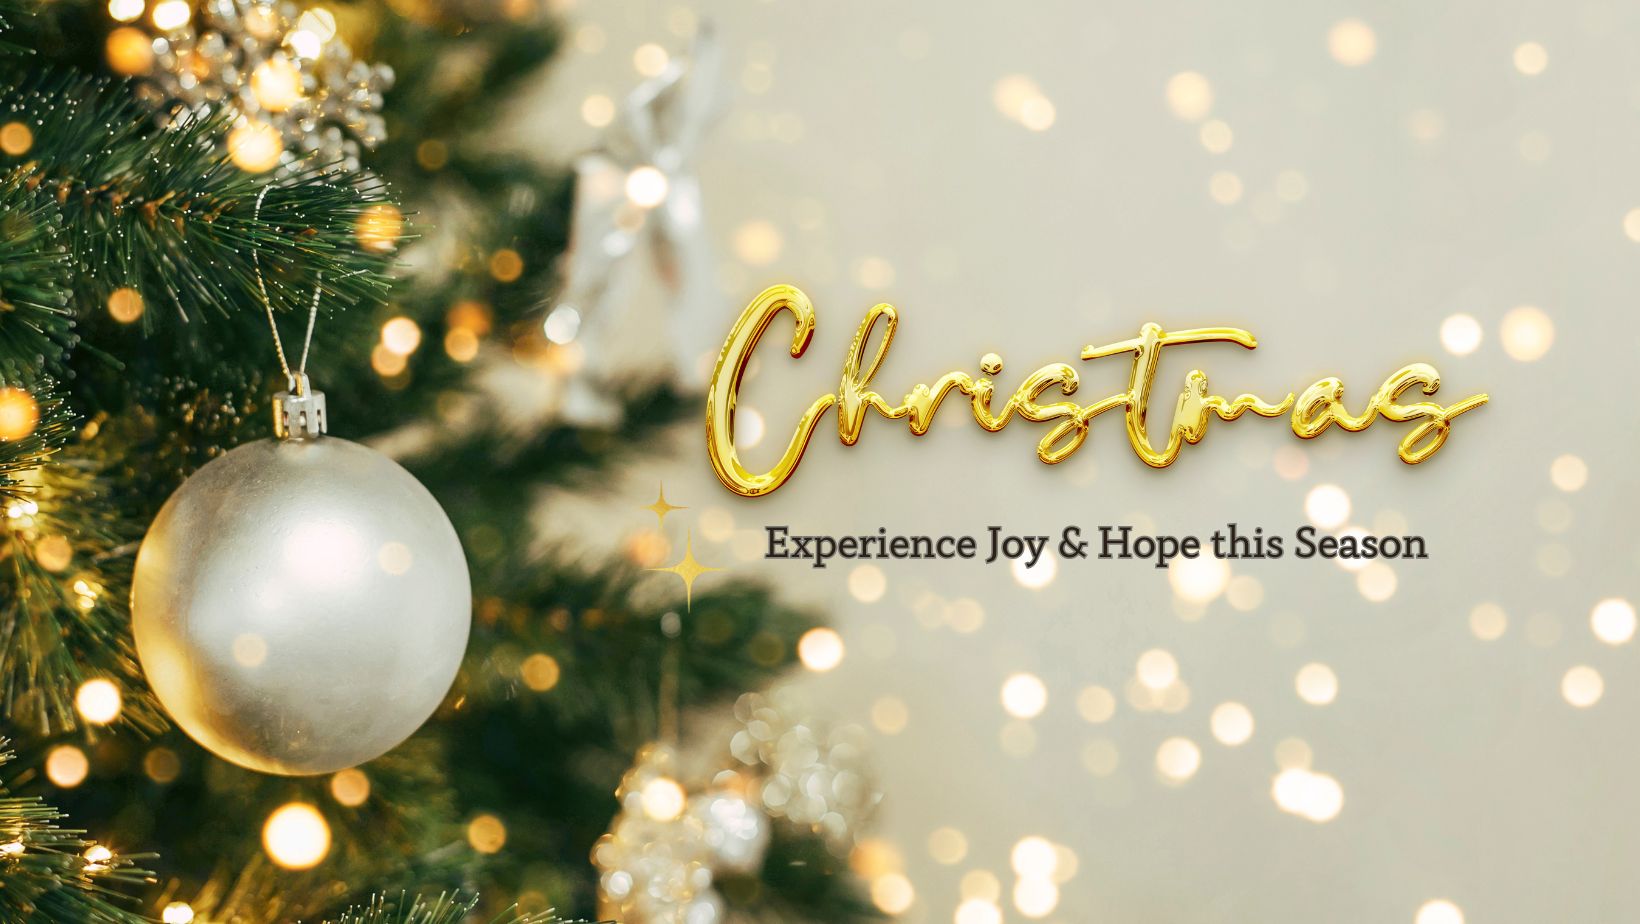 Christmas at MPC

We invite you to share in the JOY & HOPE of the season. MPC offers several events throughout the holiday season. We can't wait to celebrate with you! 
